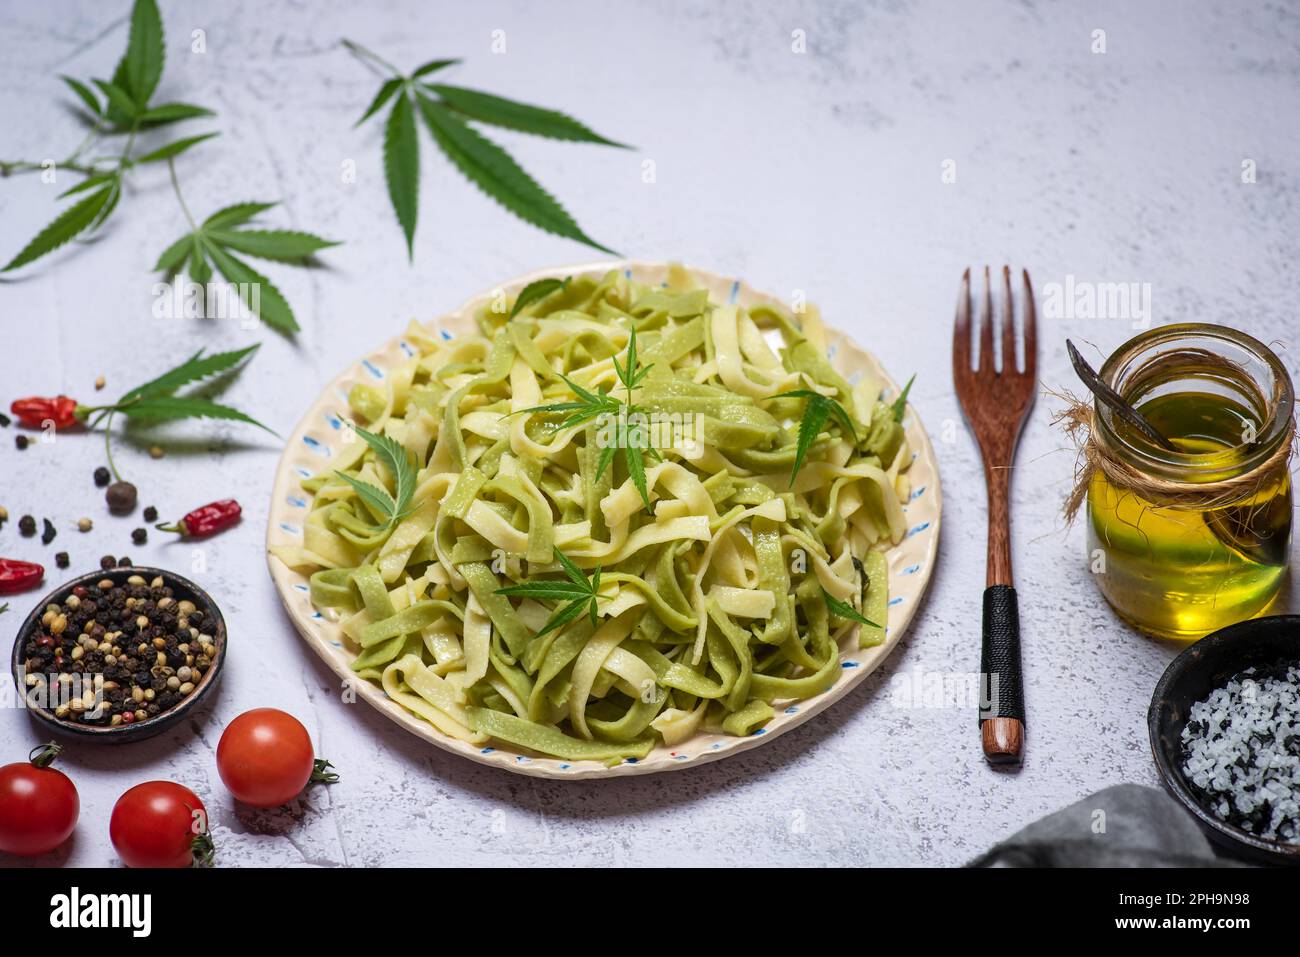 Italian traditional pasta Tagliatelle with cannabis leaves in a ceramic bowl on a white background top view Stock Photo